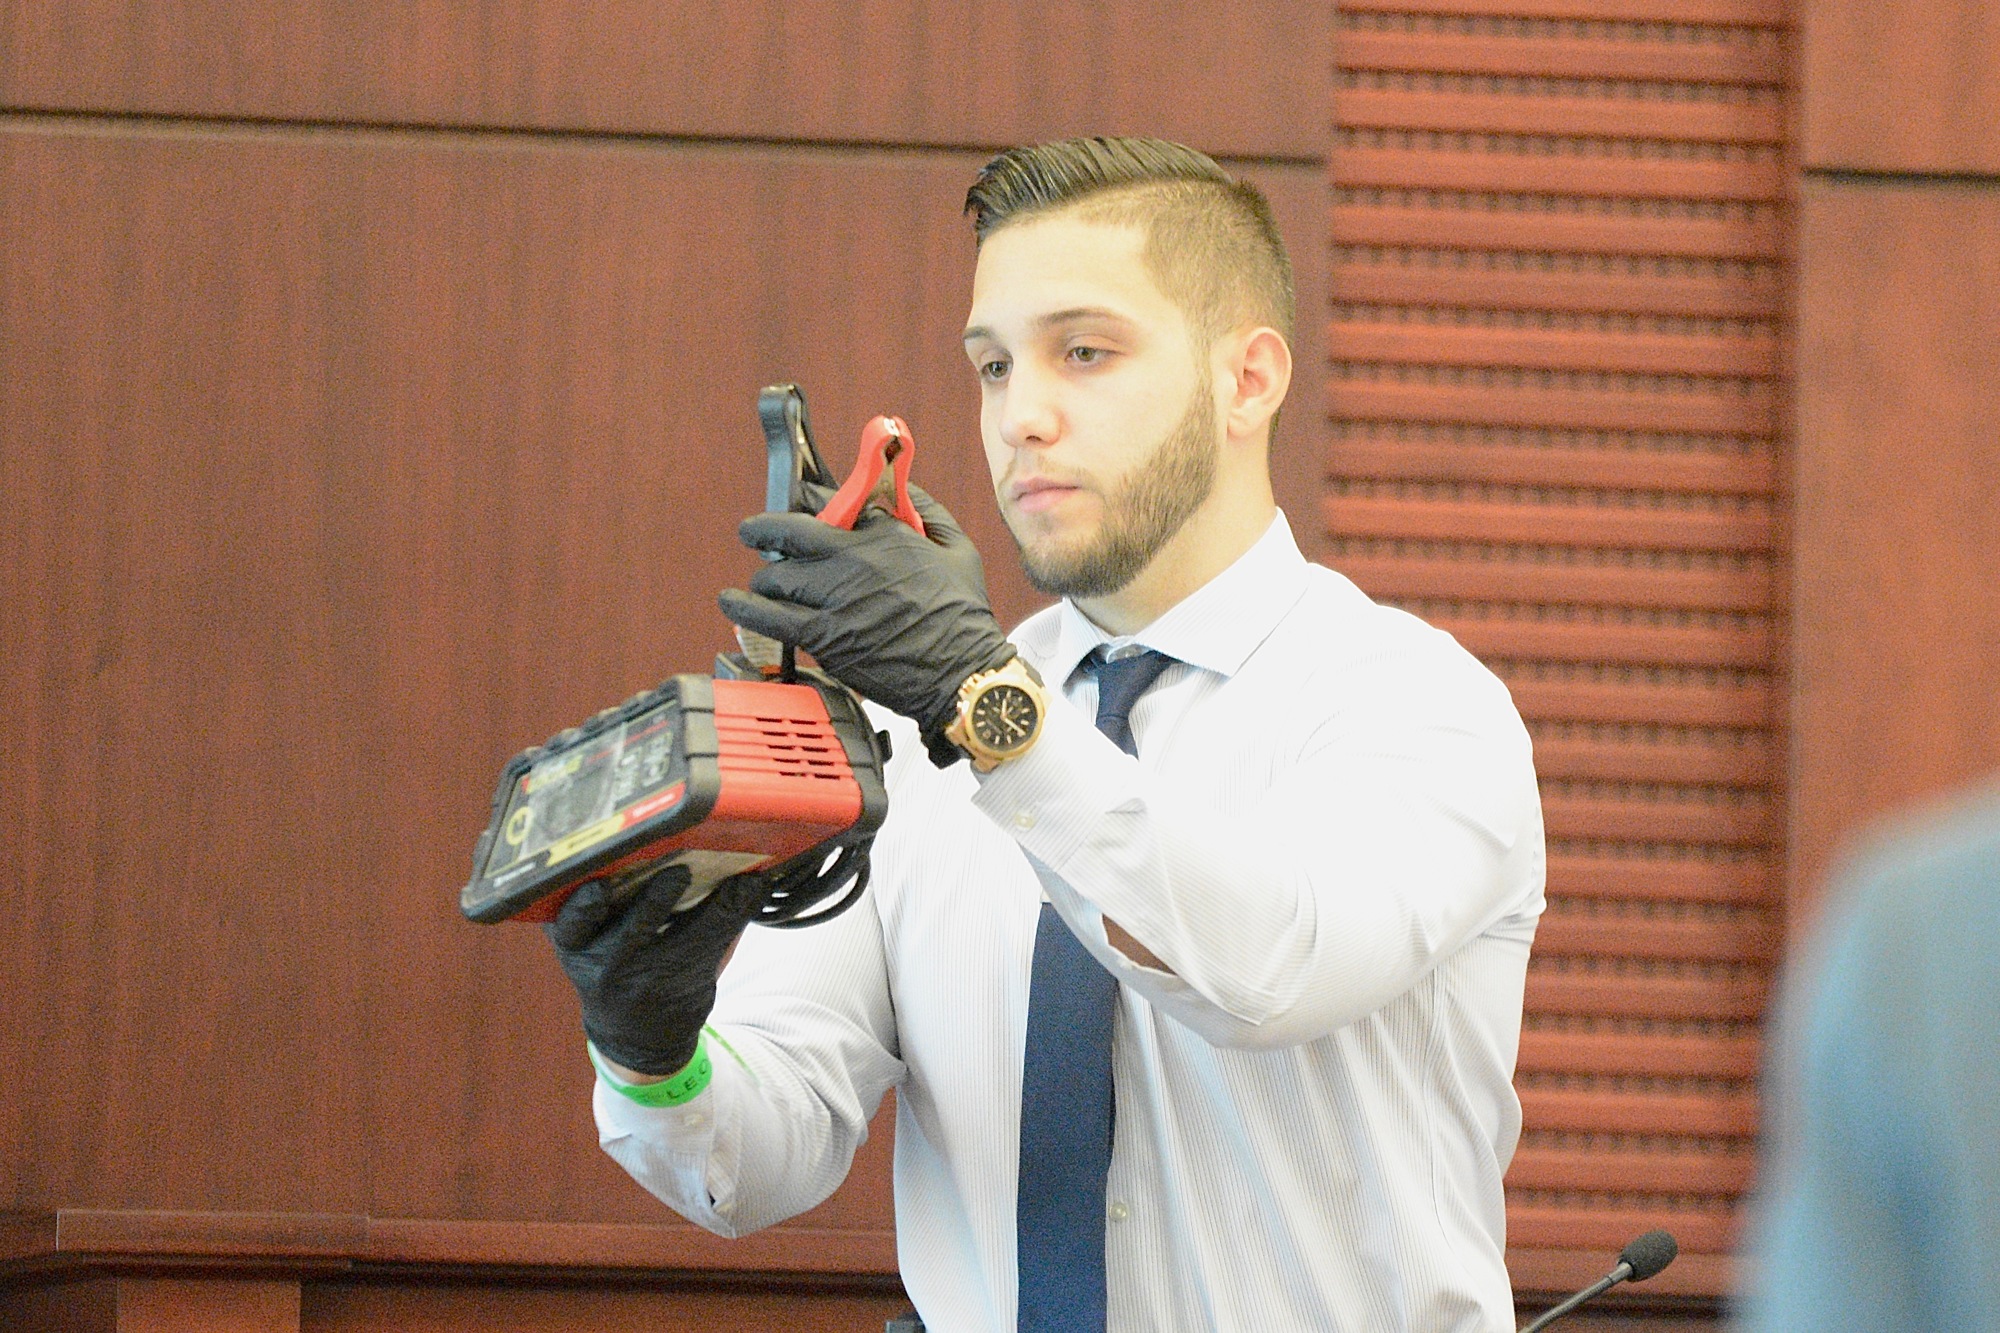 Deputy Omar Ocampo holds up part of the device found inside the home. (Photo by Jonathan Simmons)